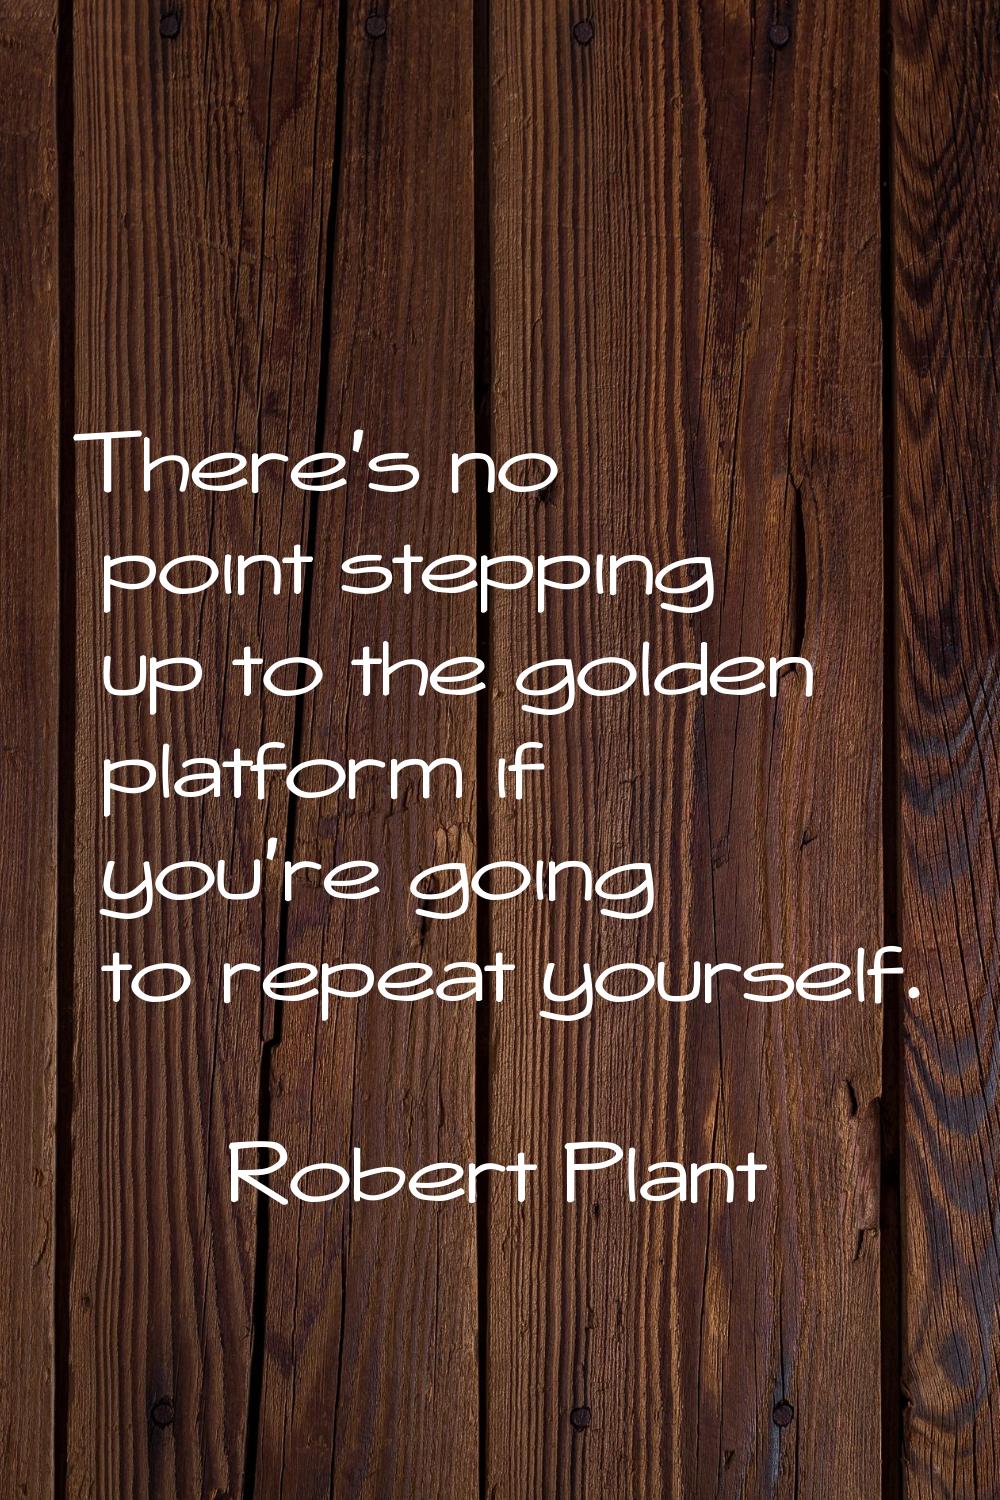 There's no point stepping up to the golden platform if you're going to repeat yourself.